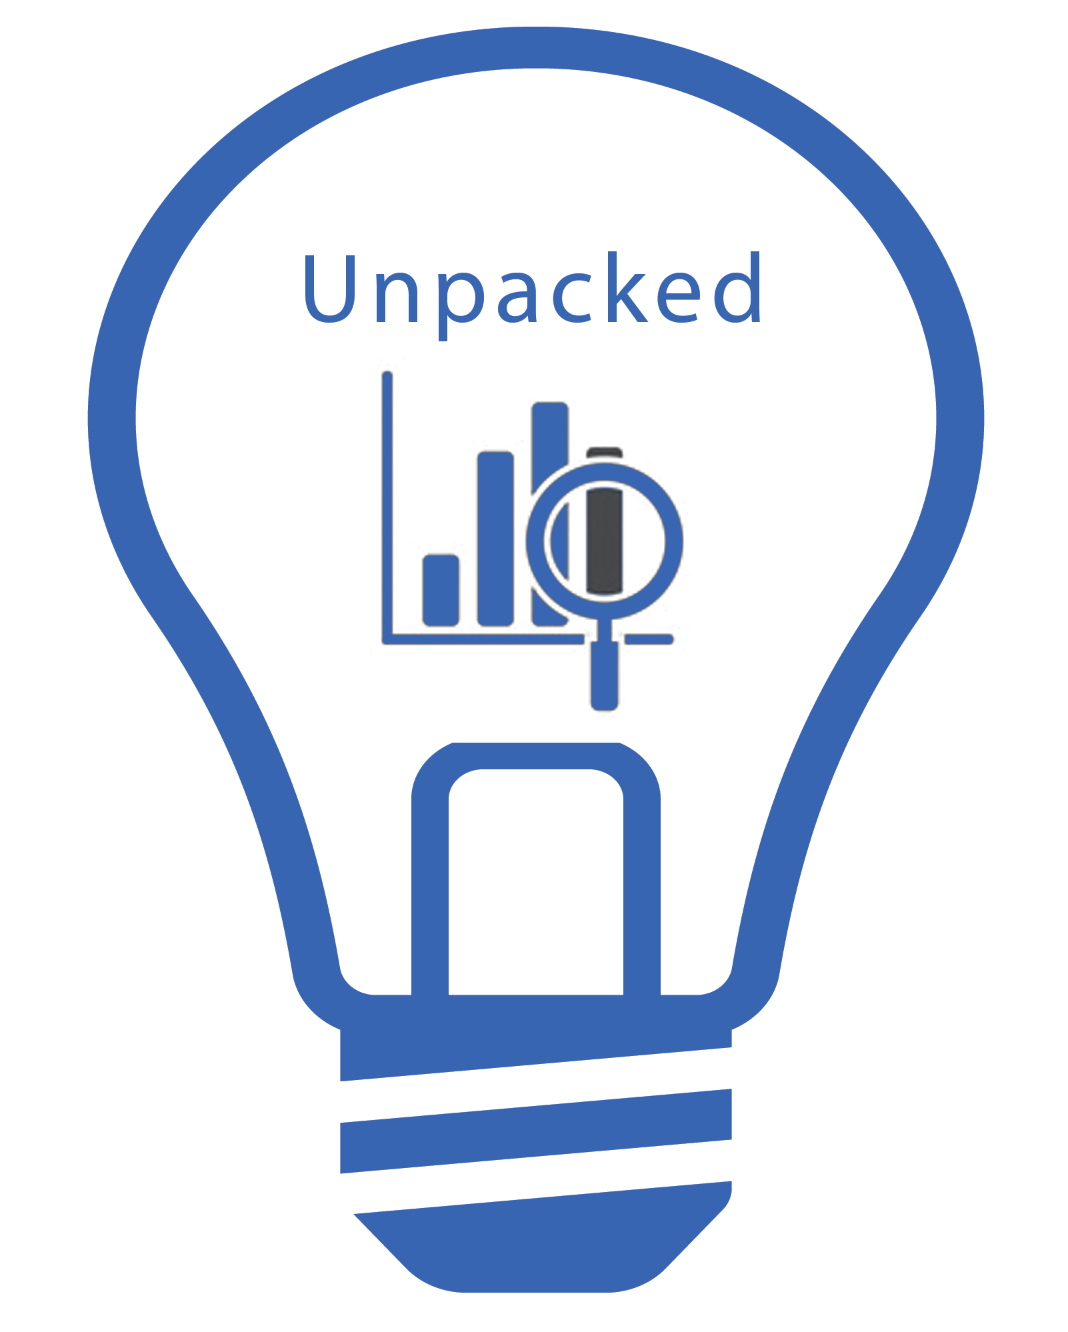 Unpacked for Friday October 21st, 2016